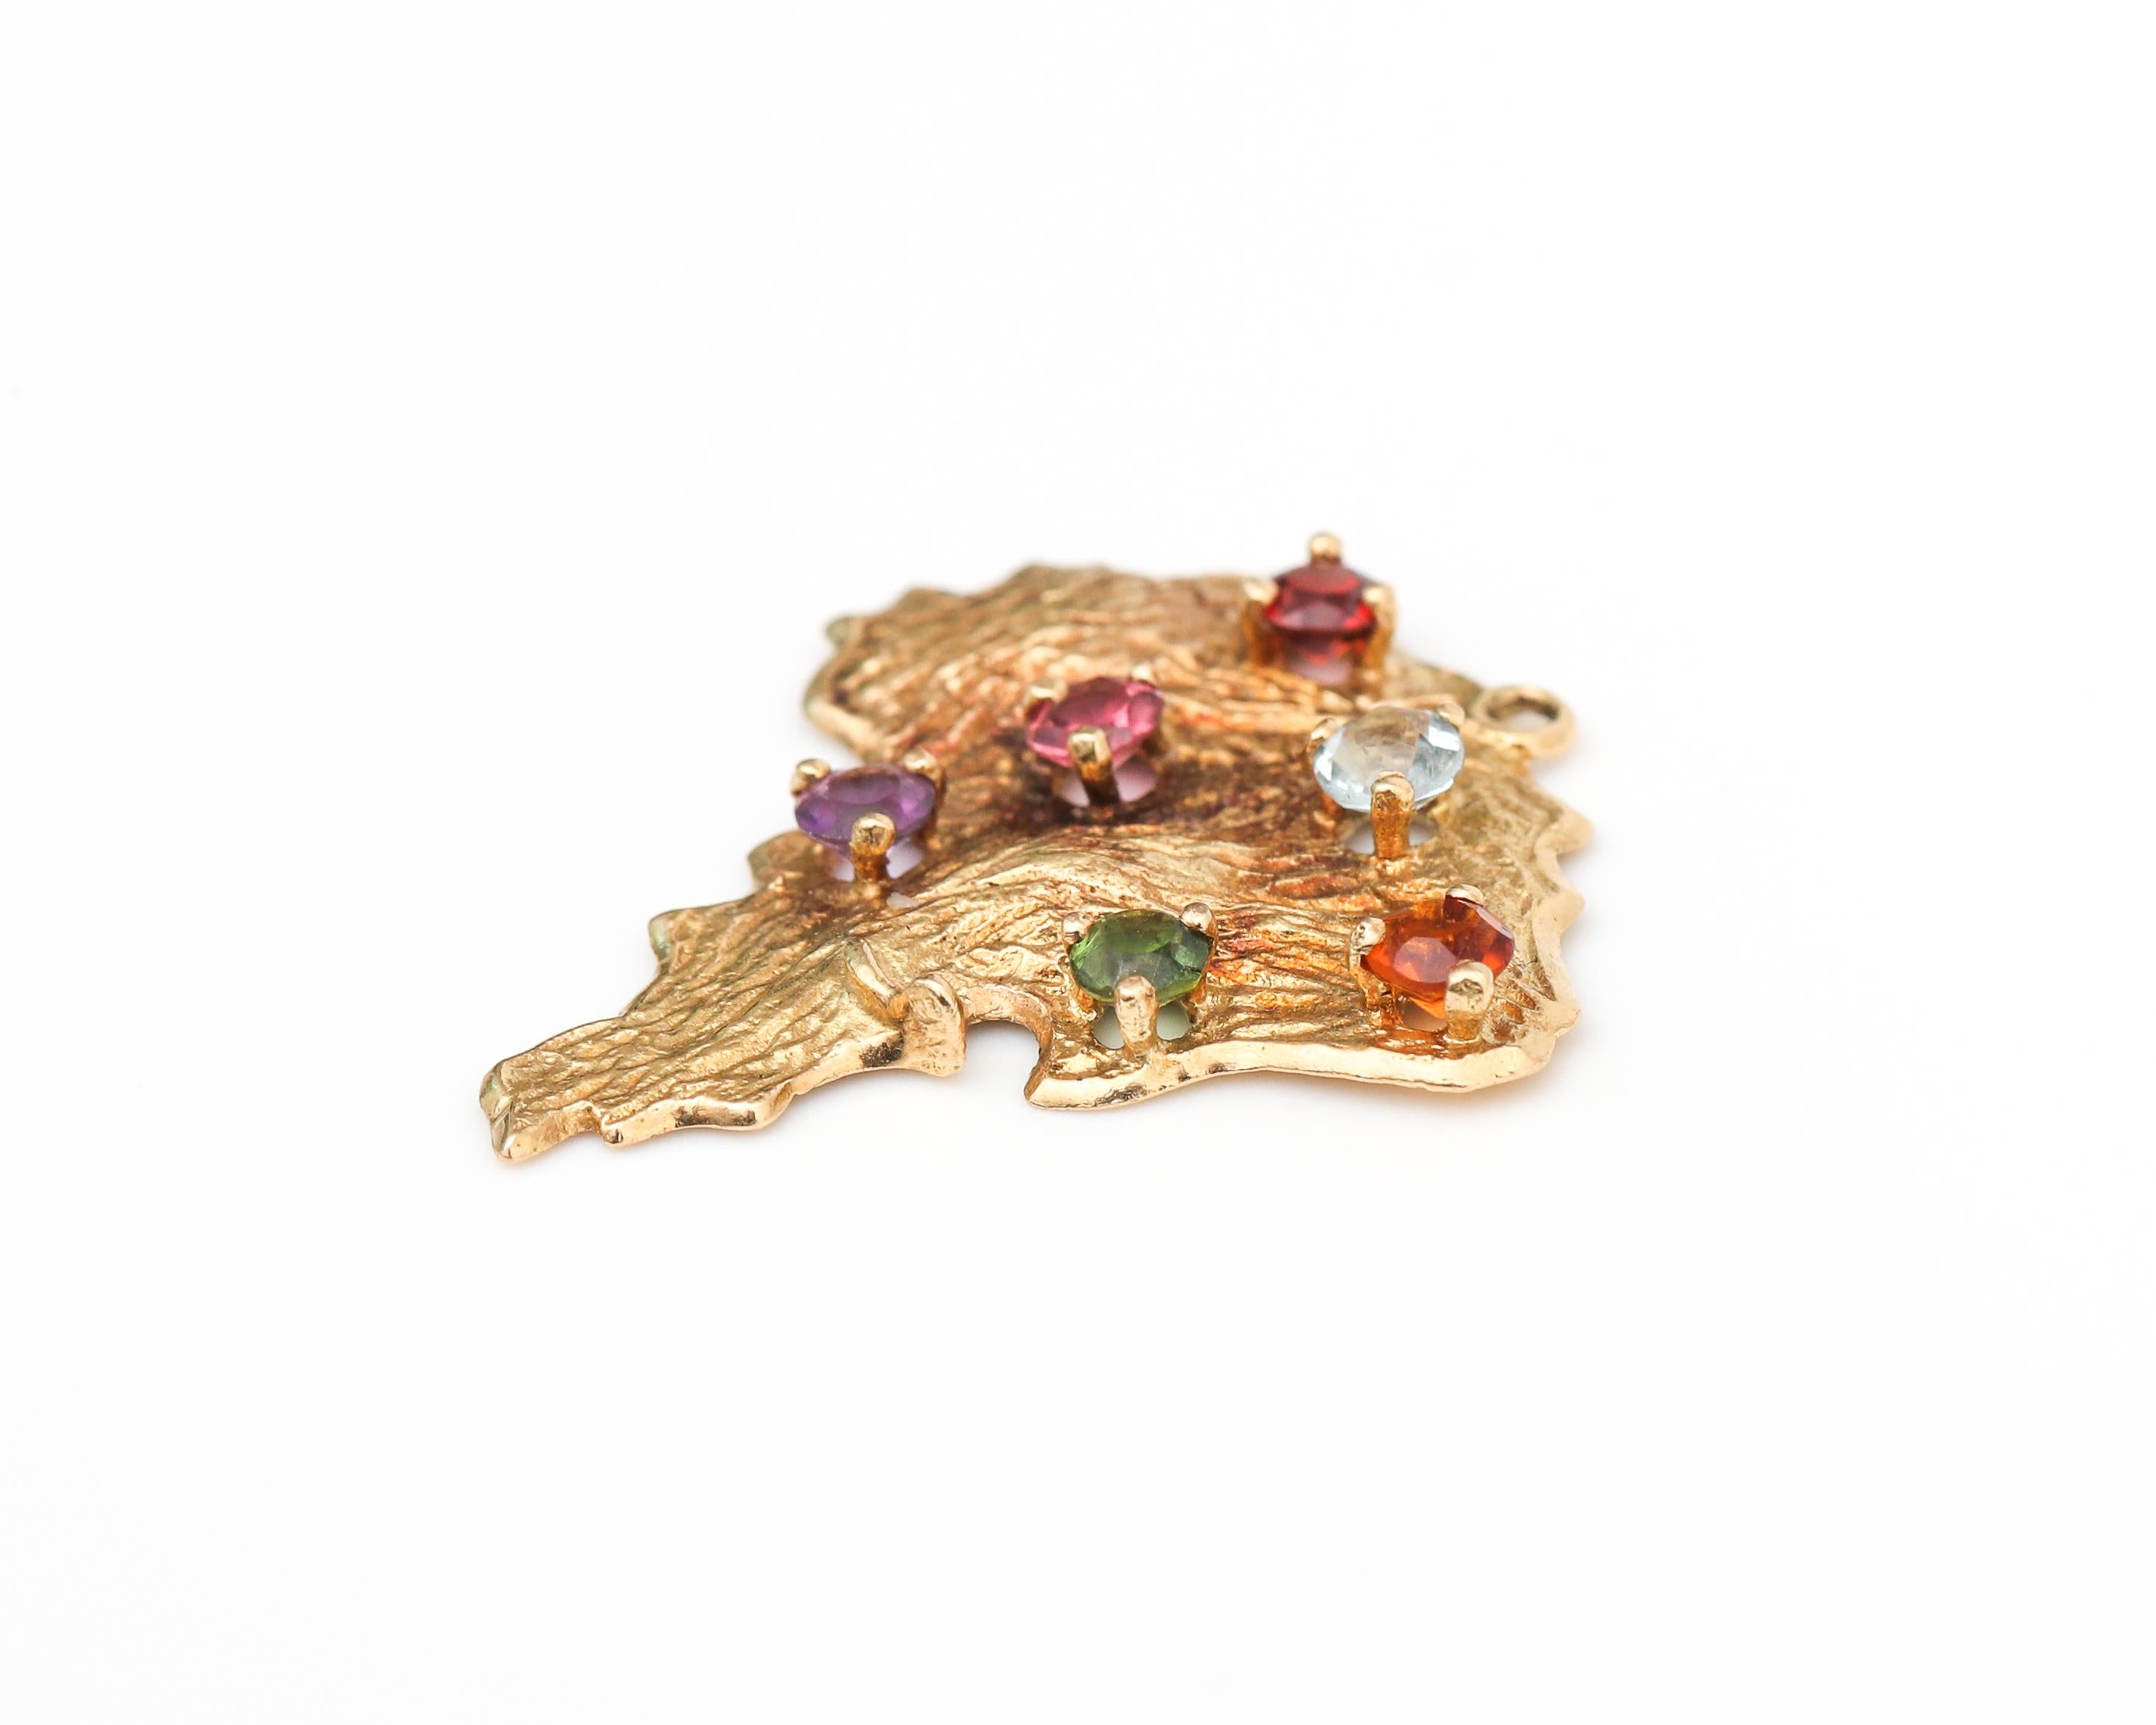 Adorable charm, made in Brazil, featuring multi gemstones and crafted in 18 karat yellow gold

Gemstones include:
1. Topaz
2. Aquamarine
3. Rubelite
4. Garnet
5. Tourmaline
6. Amethyst 
All gemstones are .10 carat each approximately and one count of